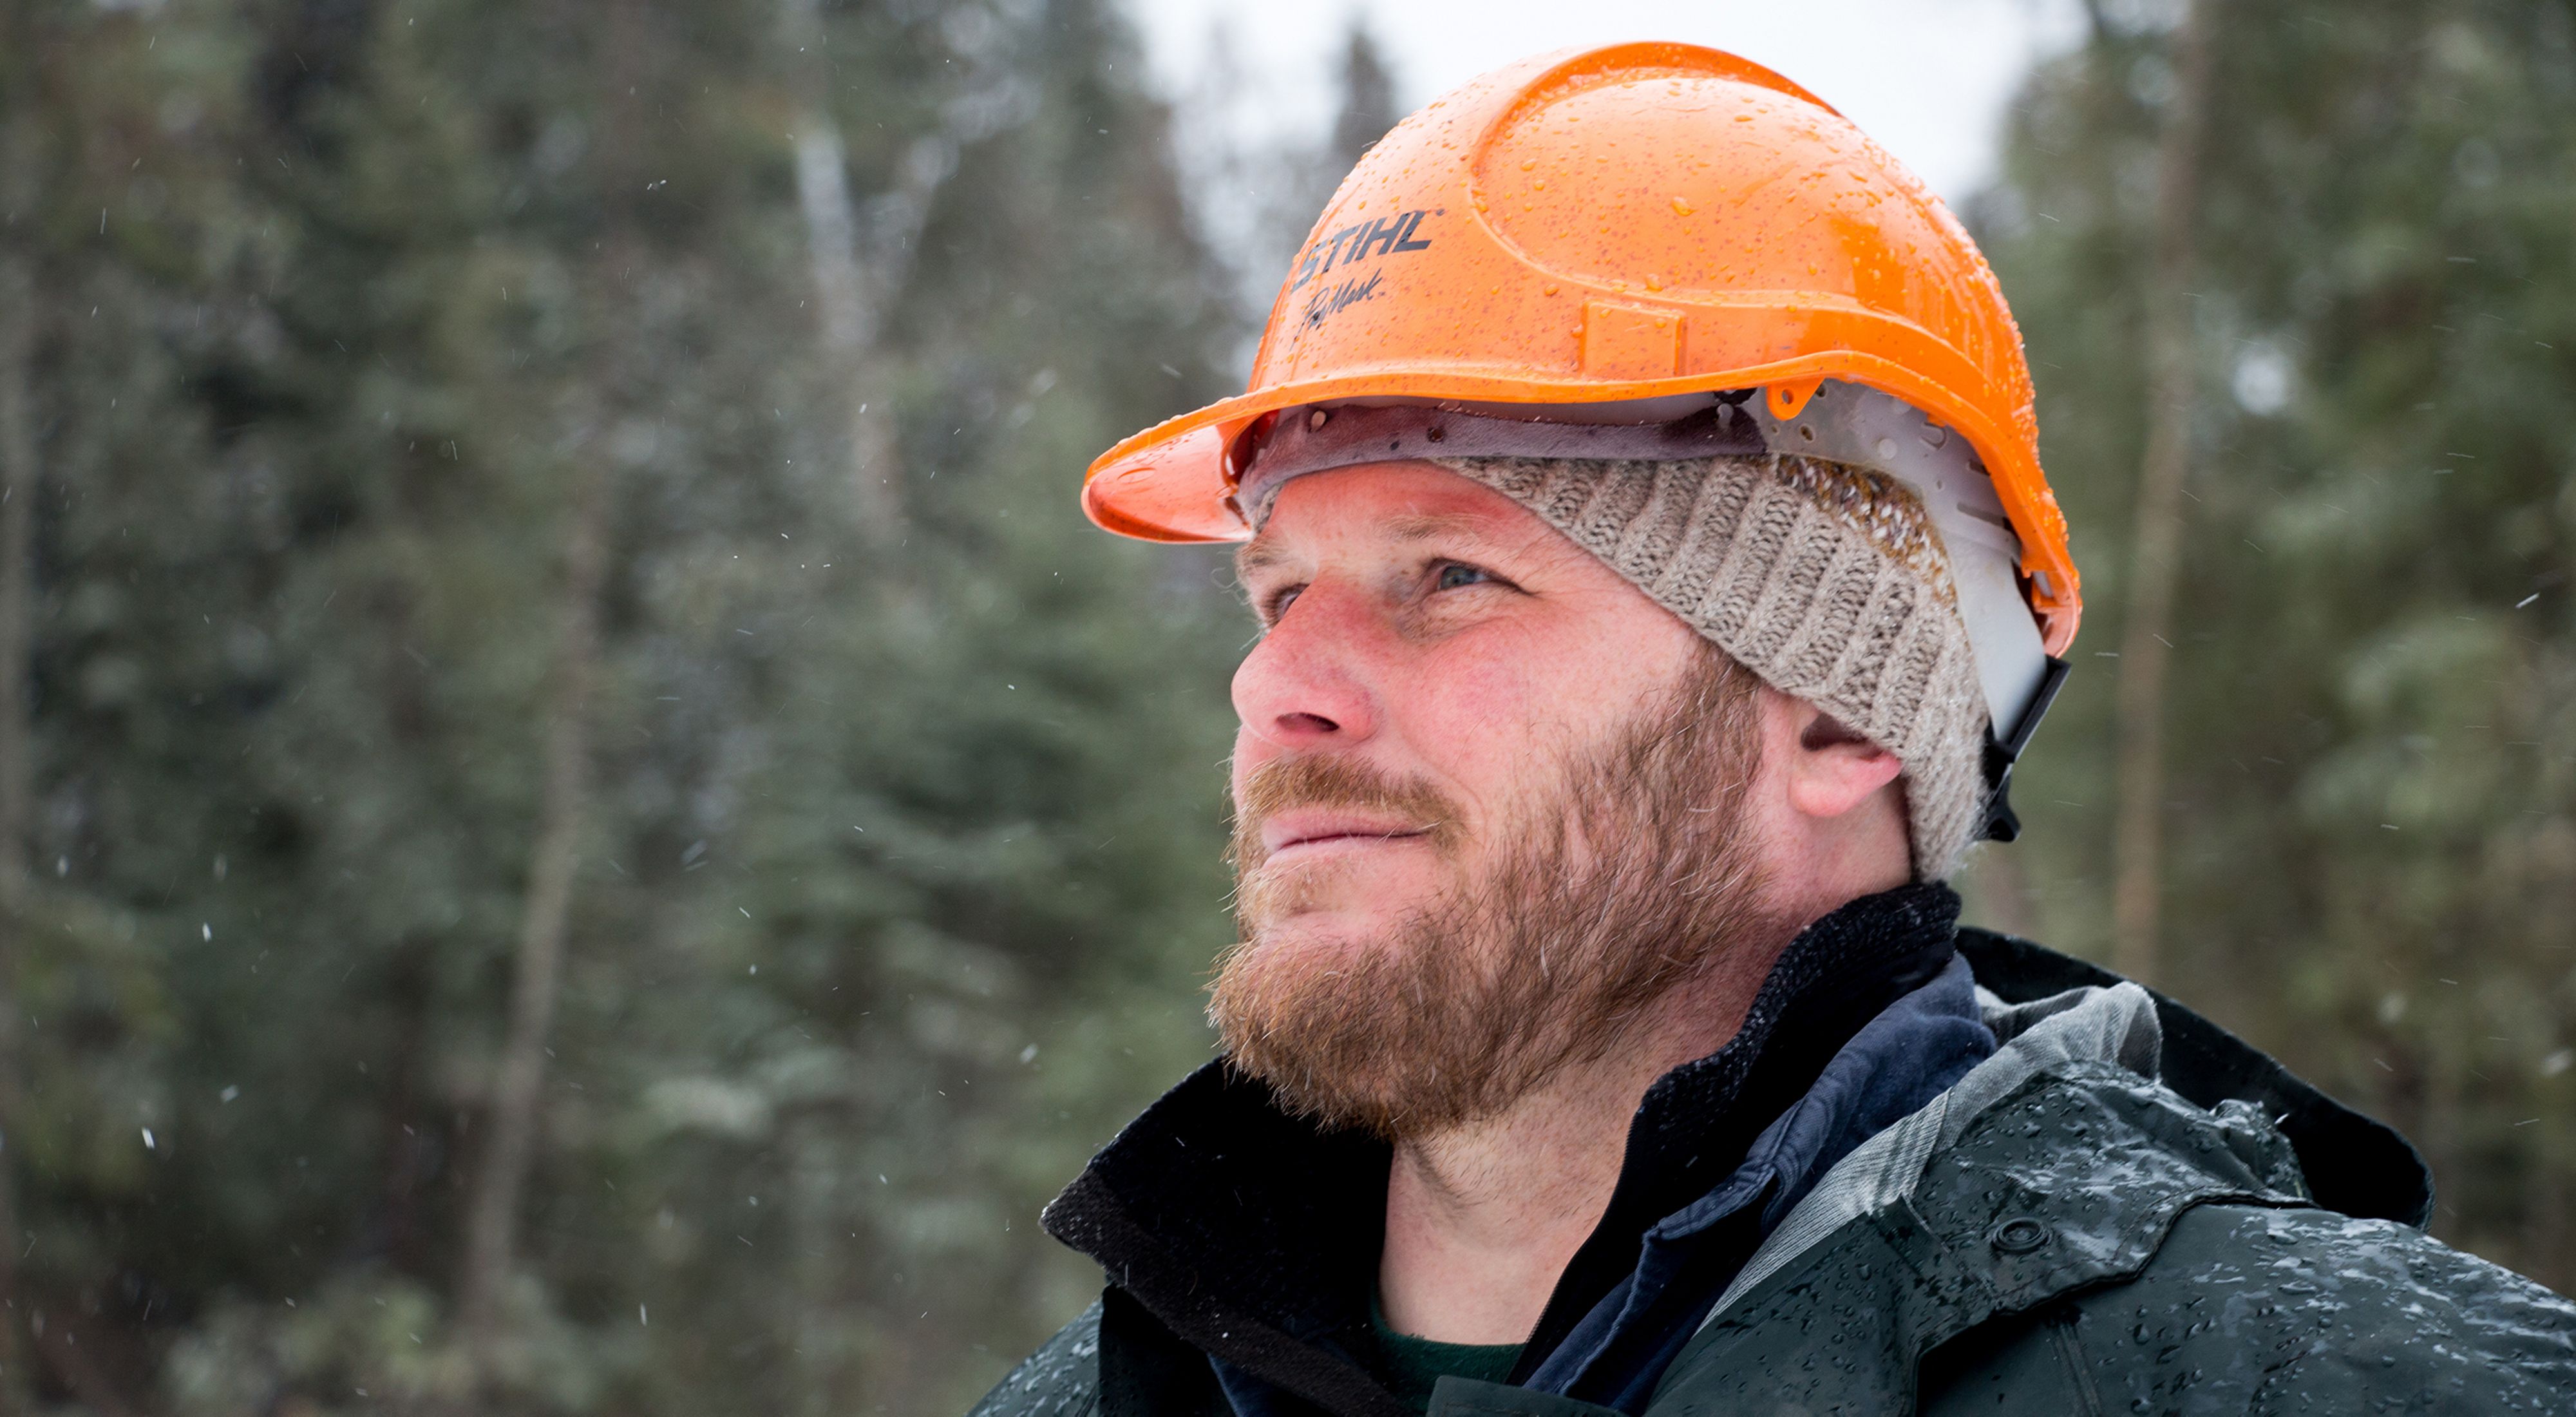 A close view of Chris Stone in the woods wearing a hard hat over a winter cap.